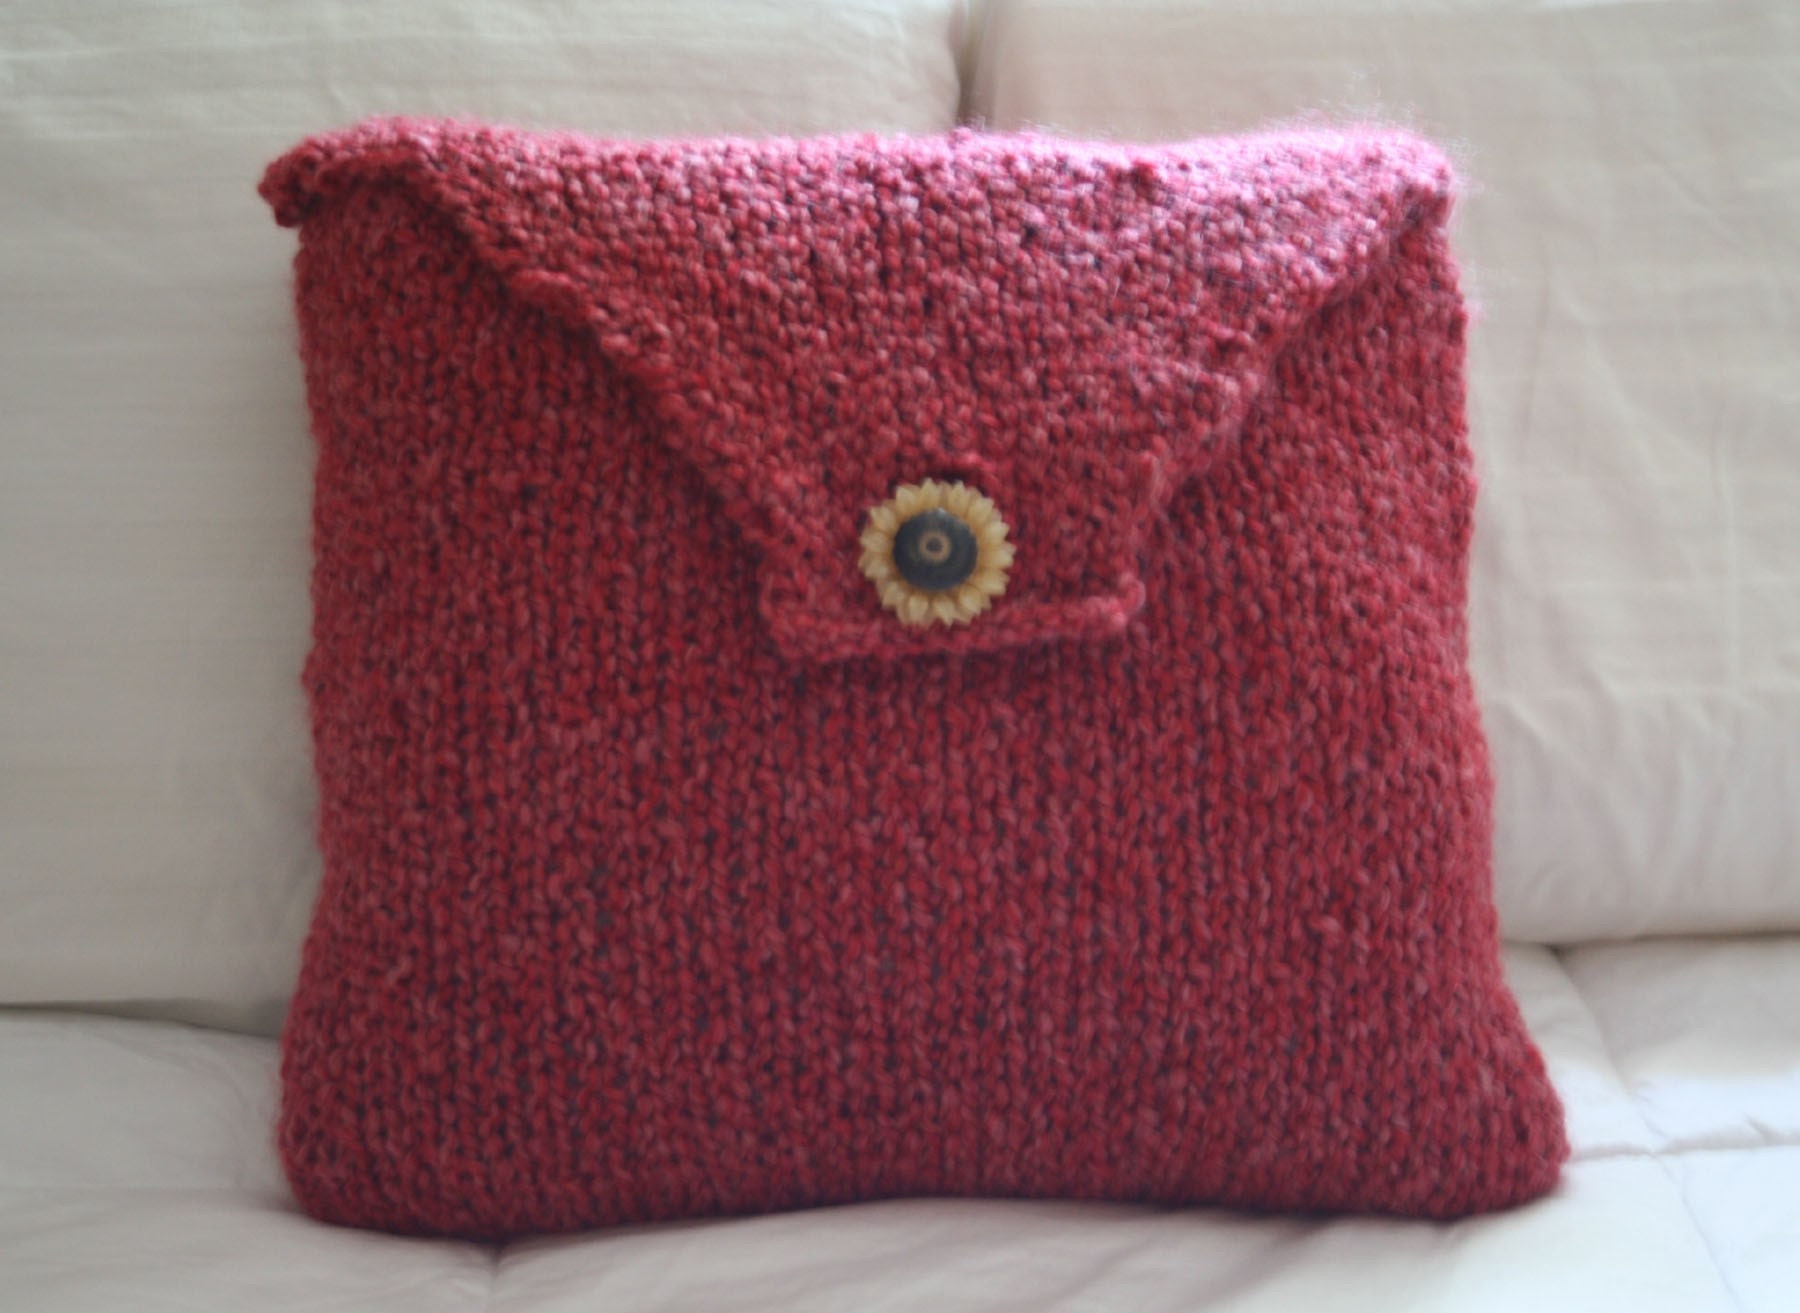 Pillow Hand knit envelope style with Sunflower